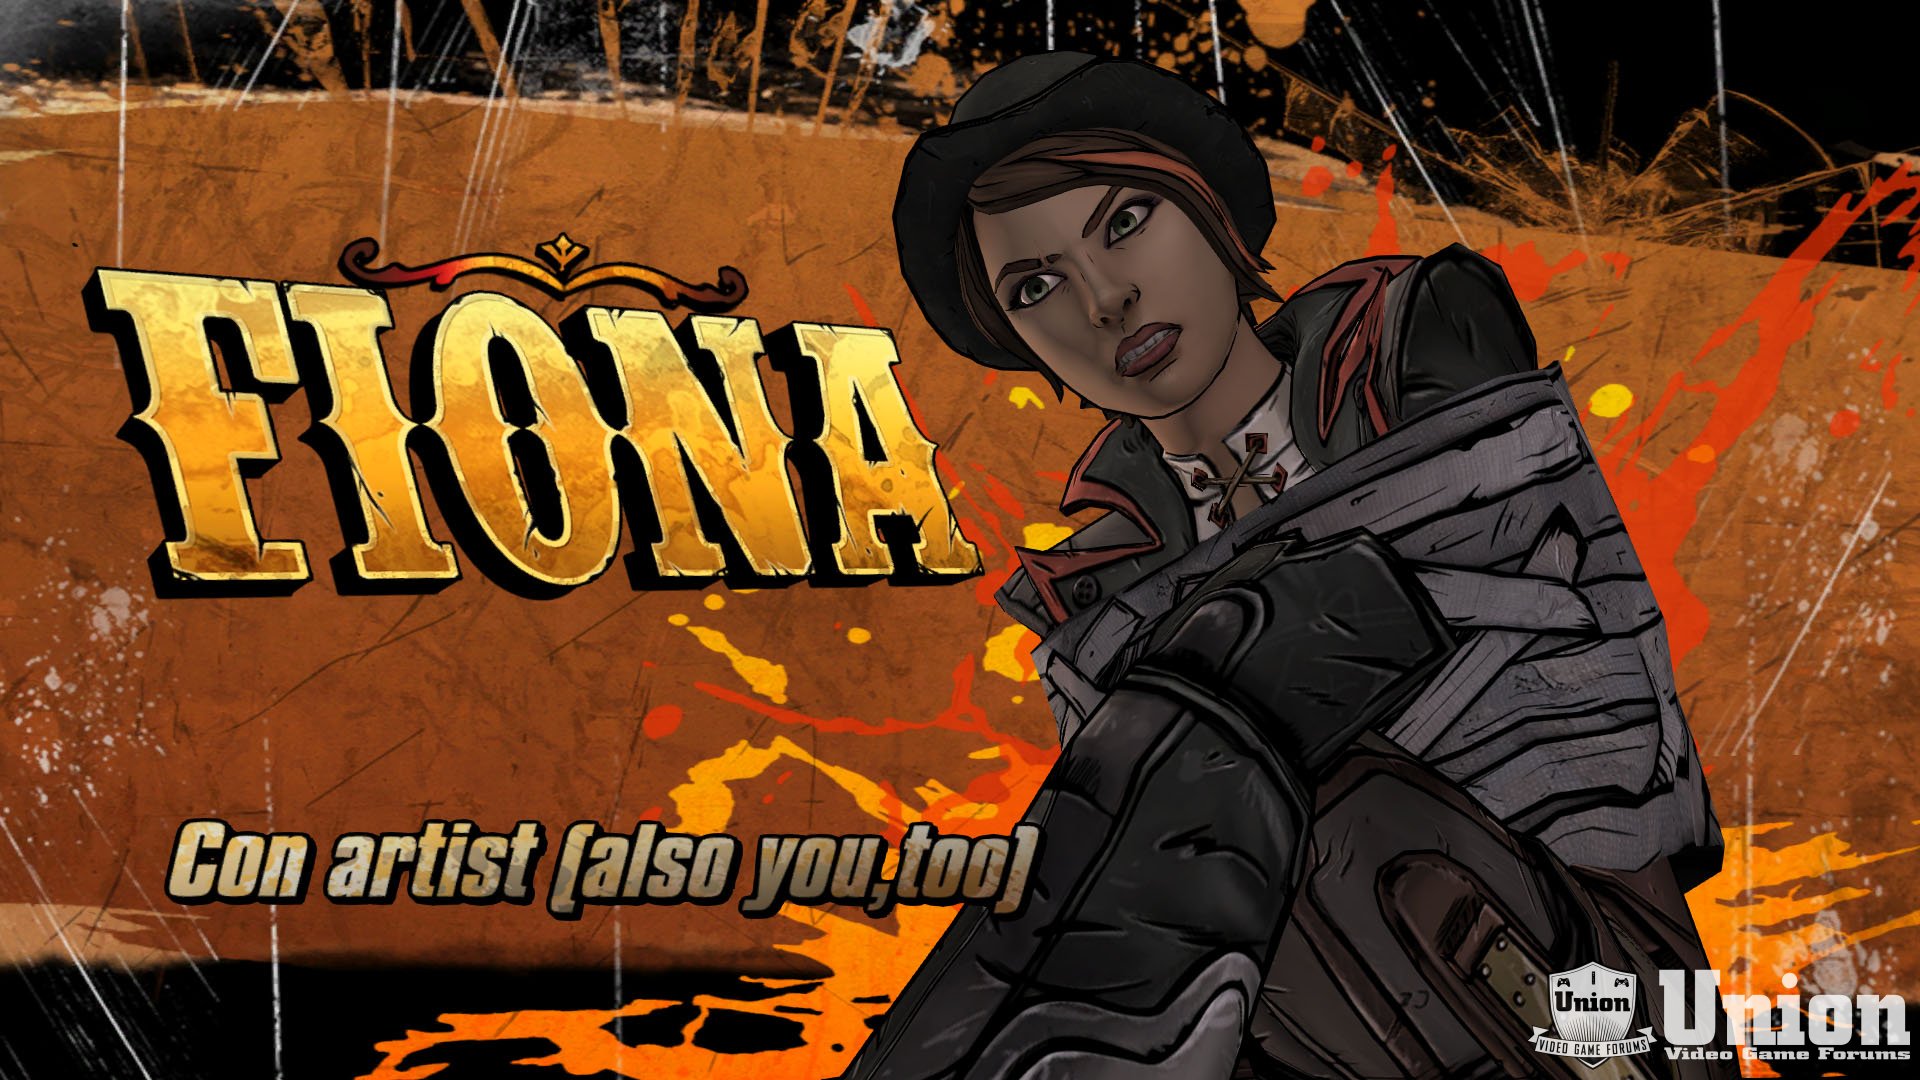 Tales from the Borderlands 08